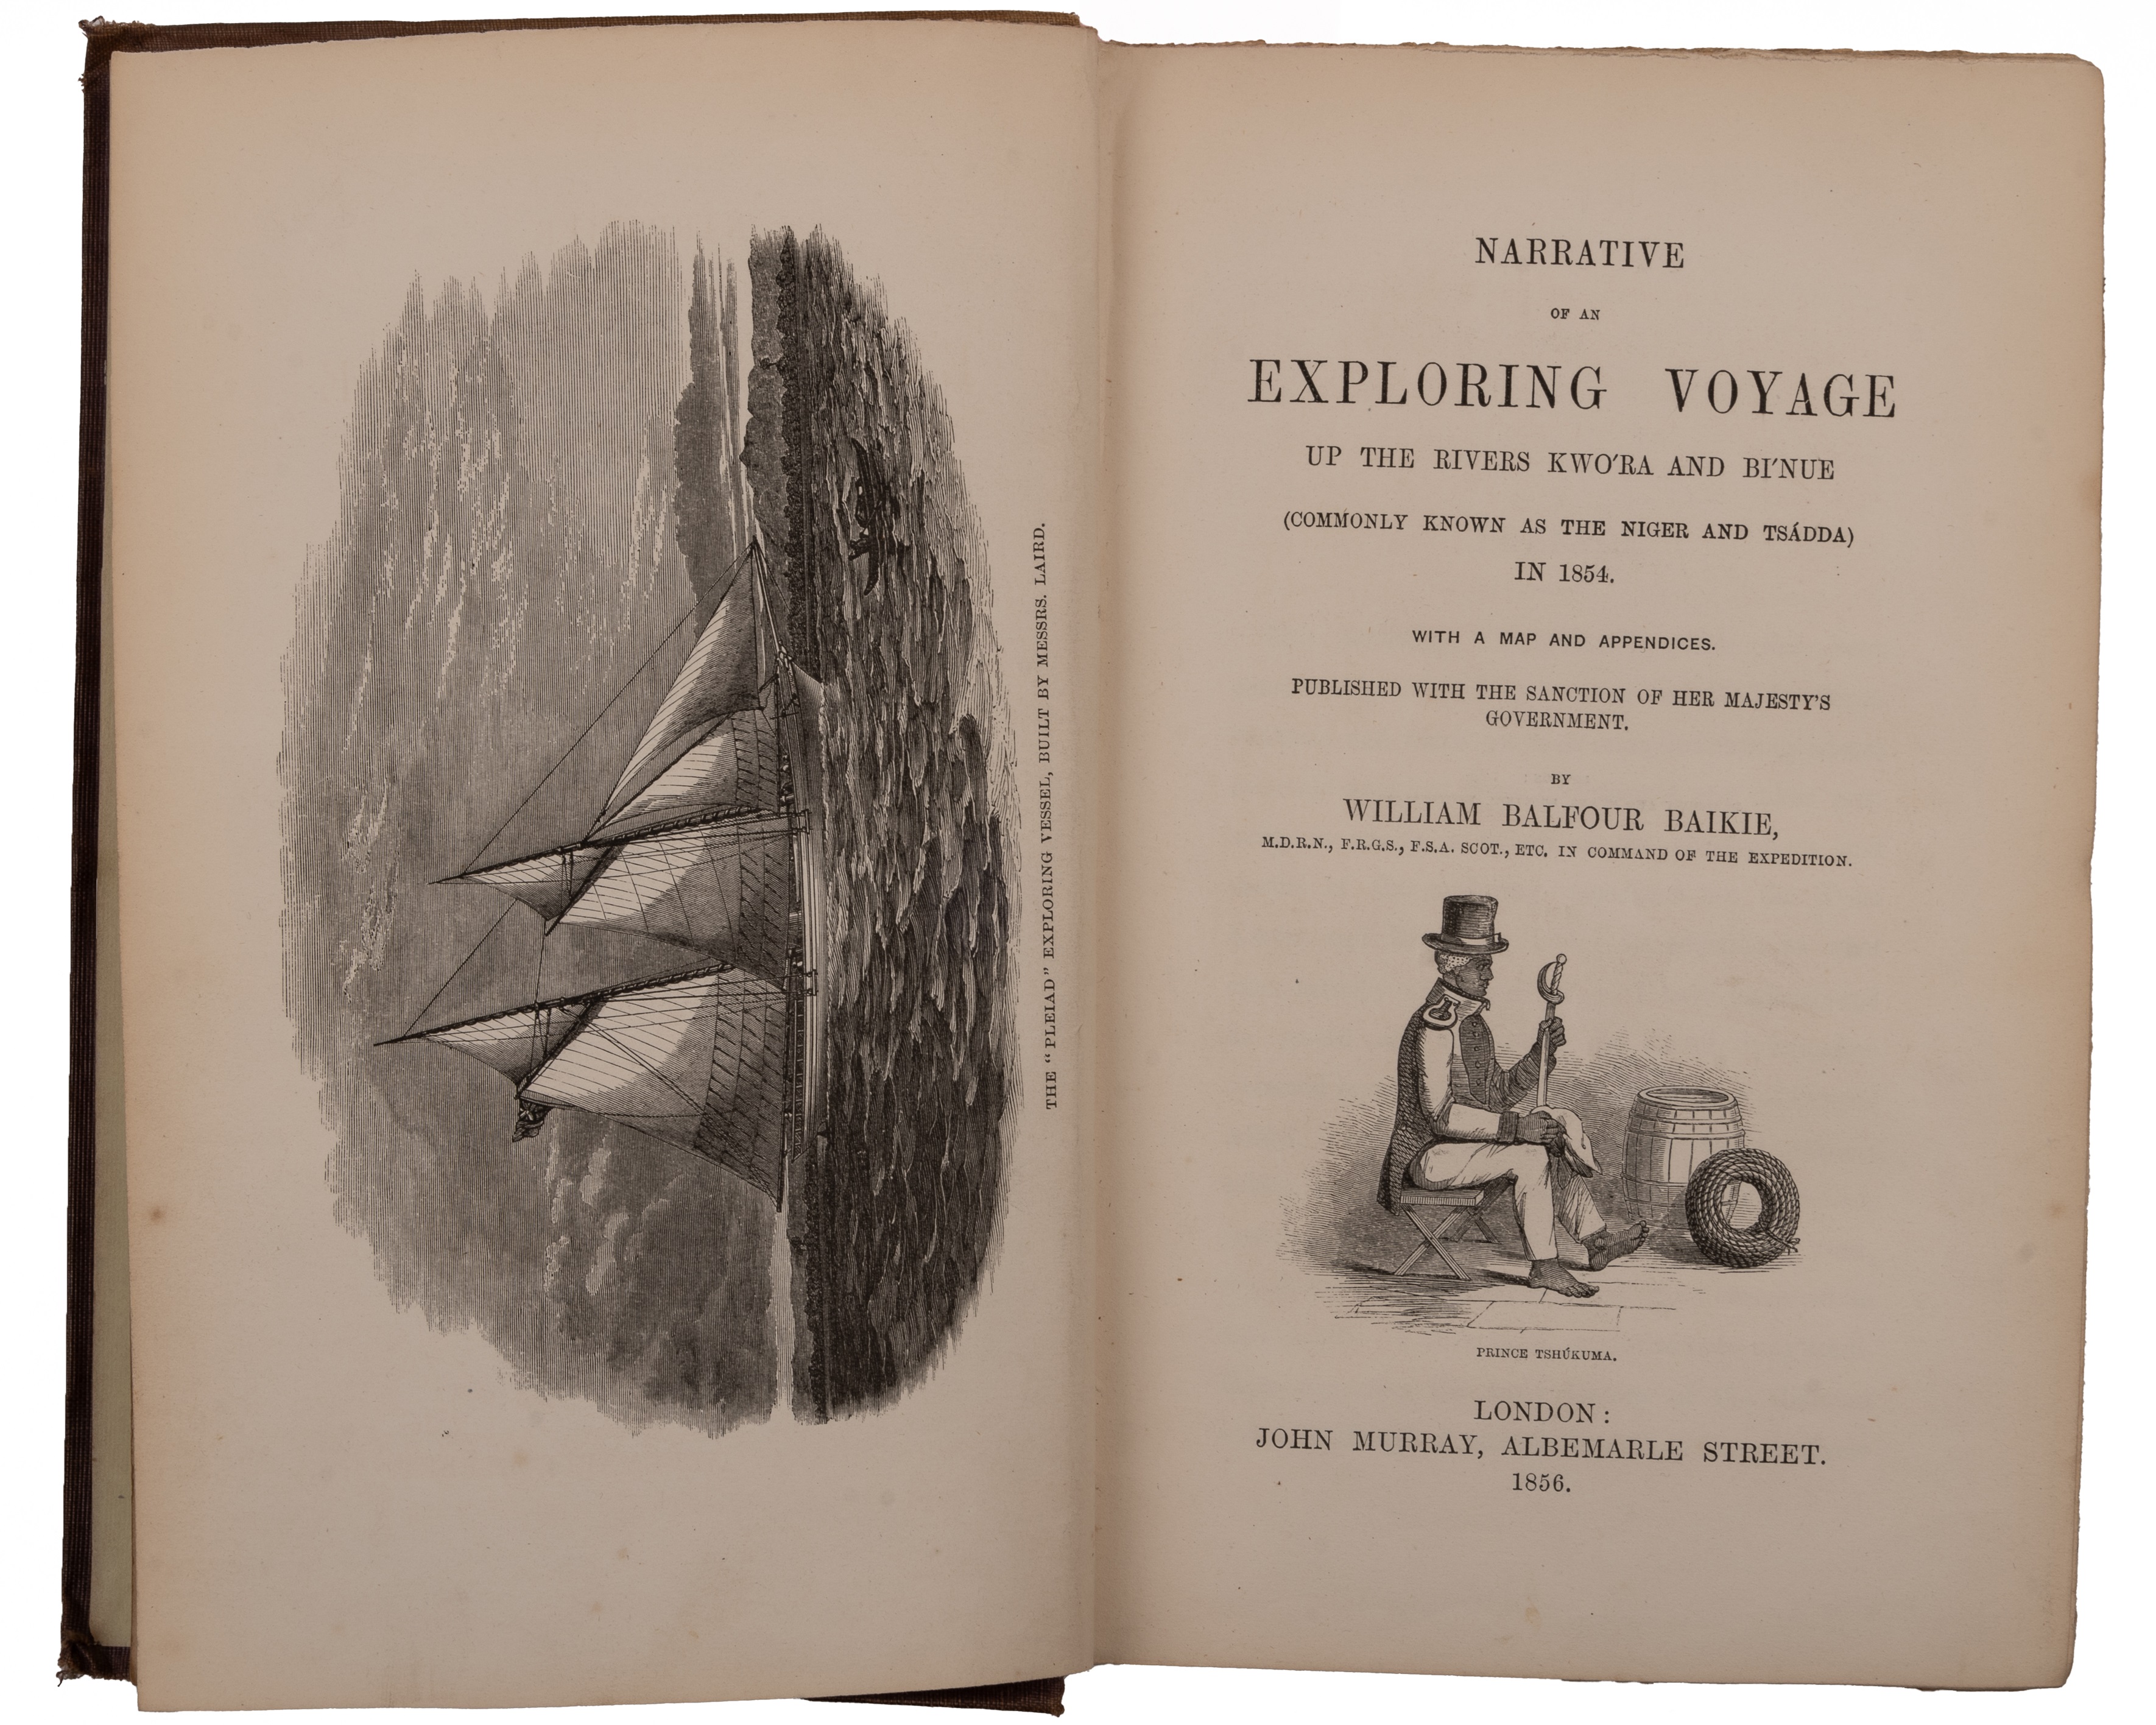 Baike (William Balfour) 'Narrative of an Exploring Voyage up the rivers Kwóra and Binue in 1854'. - Image 2 of 3